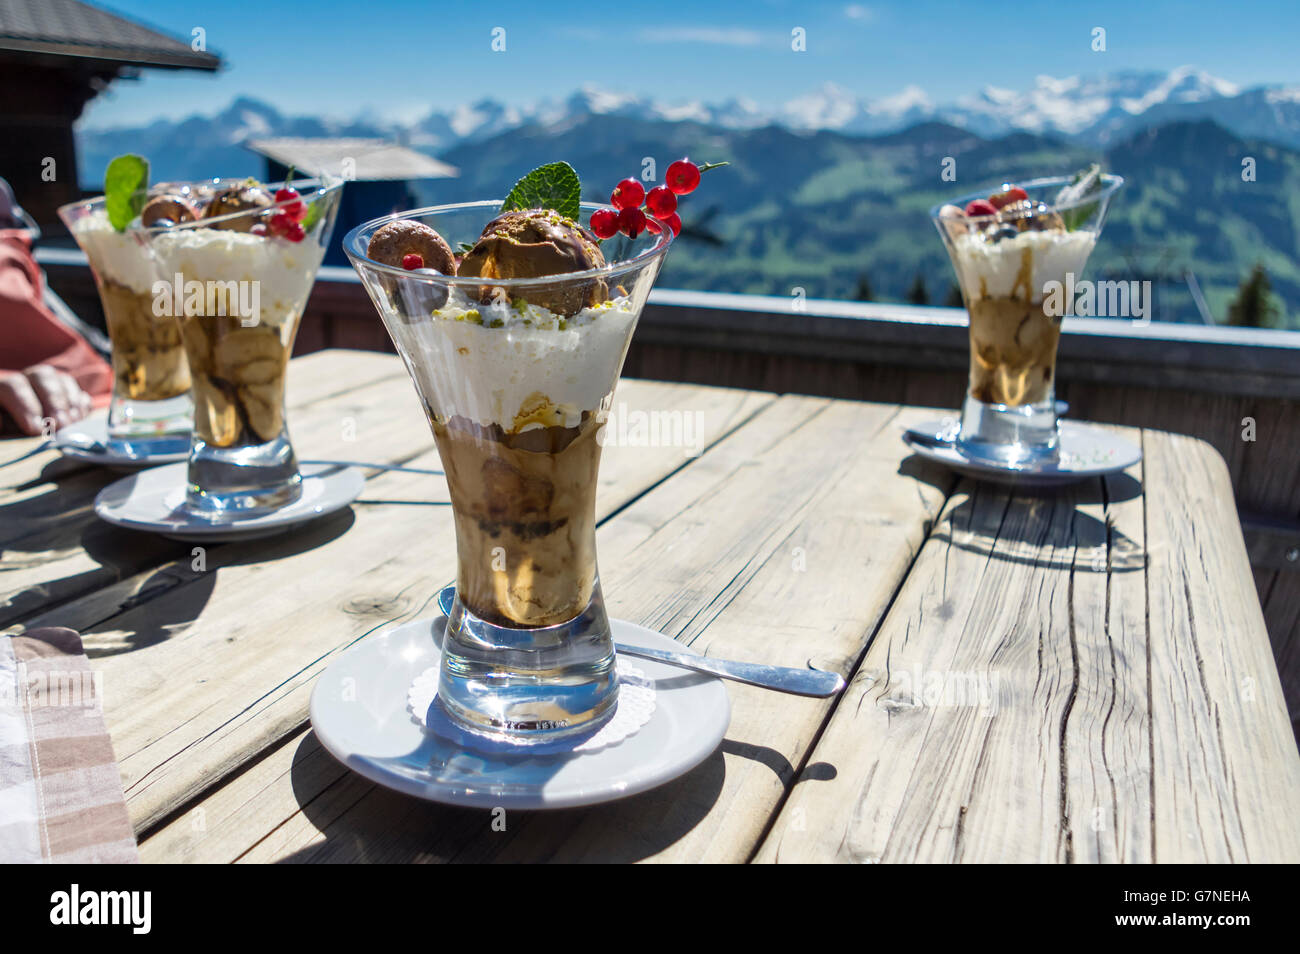 Iced coffee sundae served outdoors in the Swiss Alps. Mocha ice cream with coffee, coffee syrup and whipped cream. Stock Photo